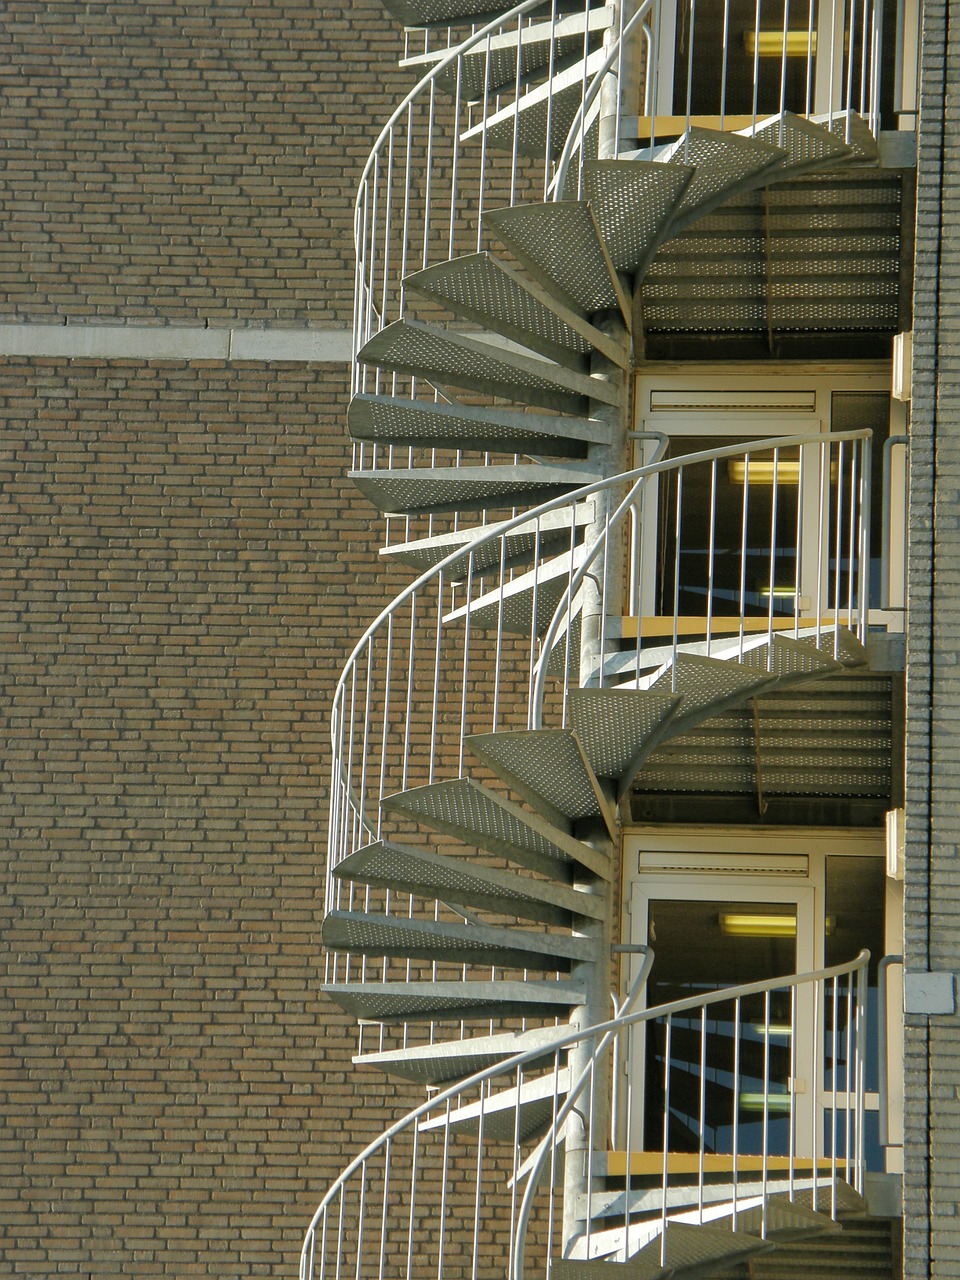 winding staircase trap dordrecht free photo